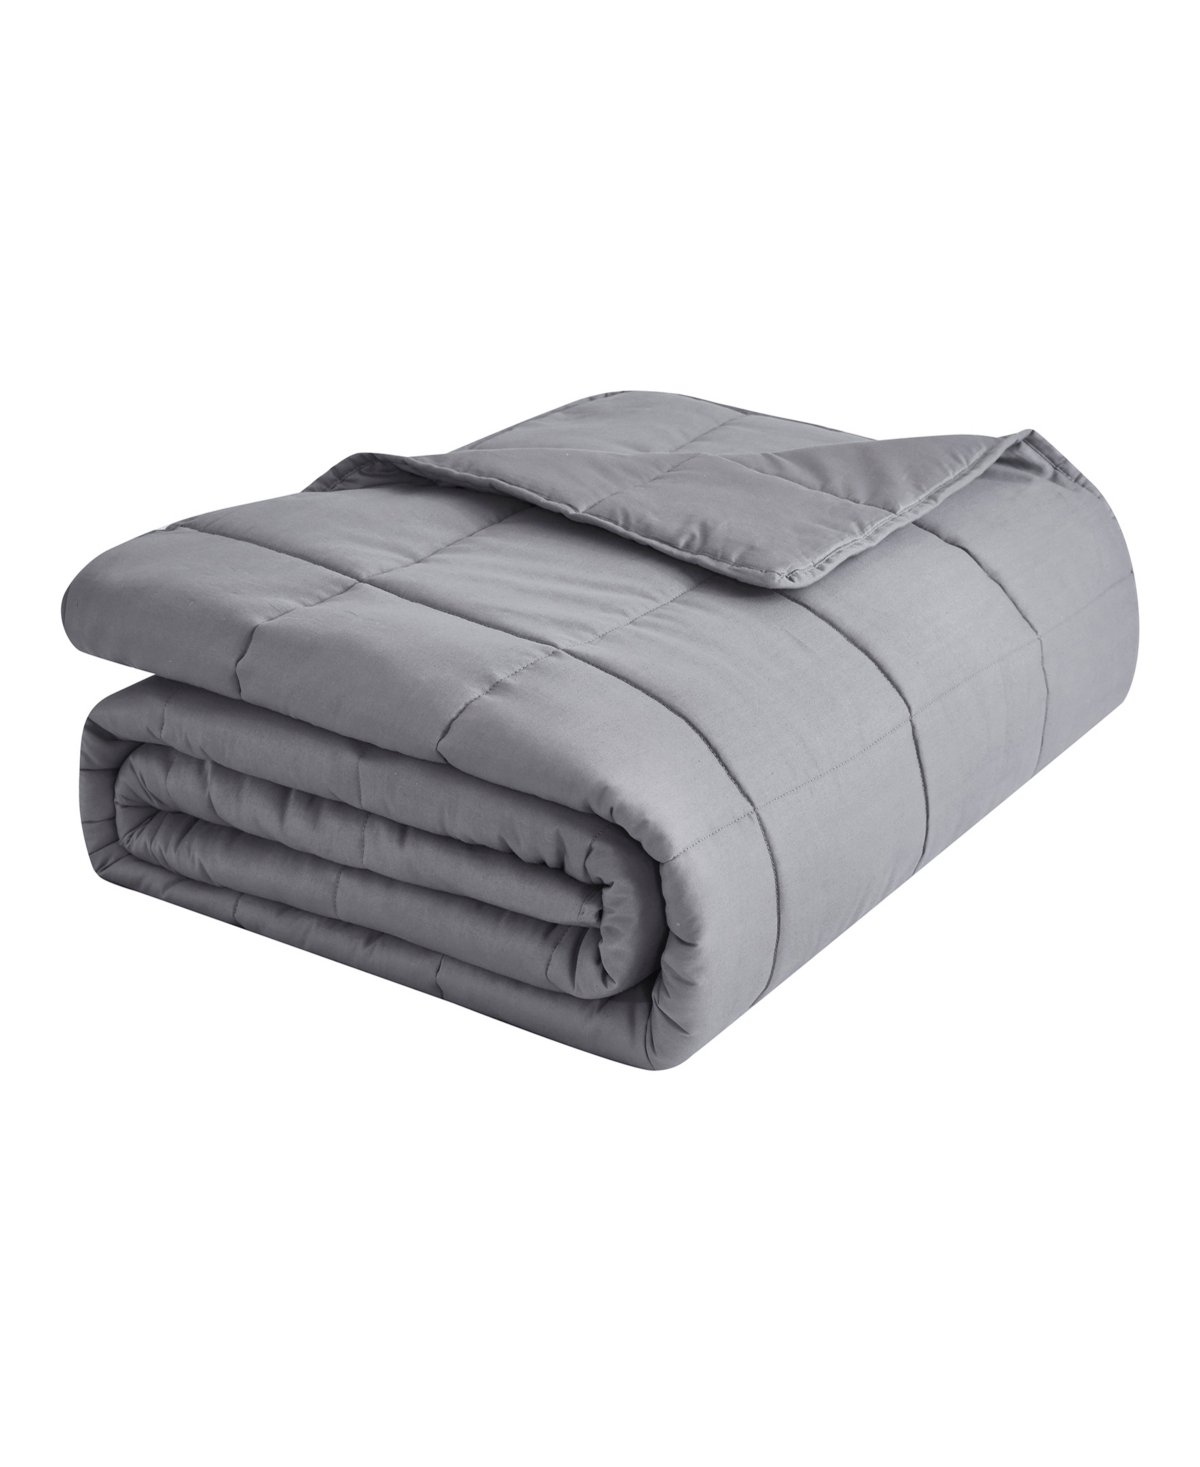 Dream Theory Cotton Weighted 12 Lbs Blanket, Twin Bedding In Gray